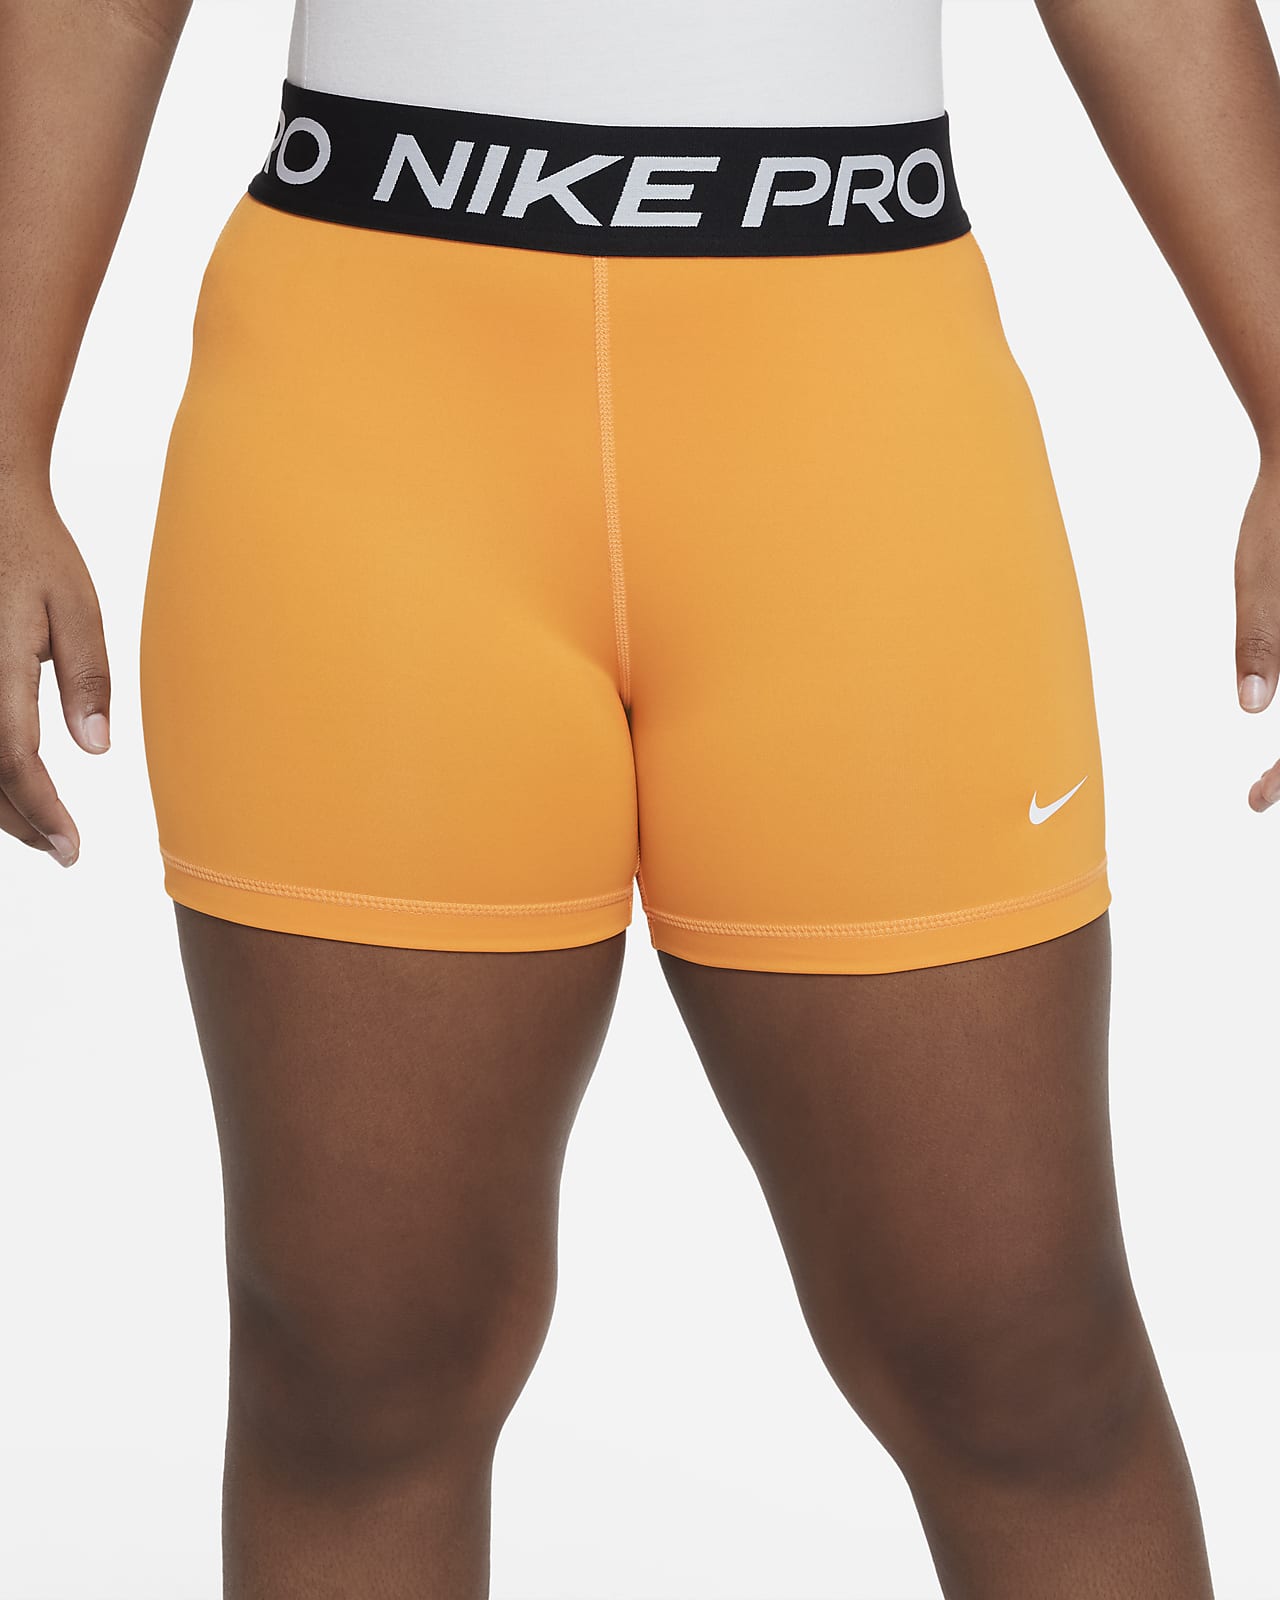 gips fax hypothese Nike Pro Dri-FIT Big Kids' (Girls') Shorts (Extended Size). Nike.com